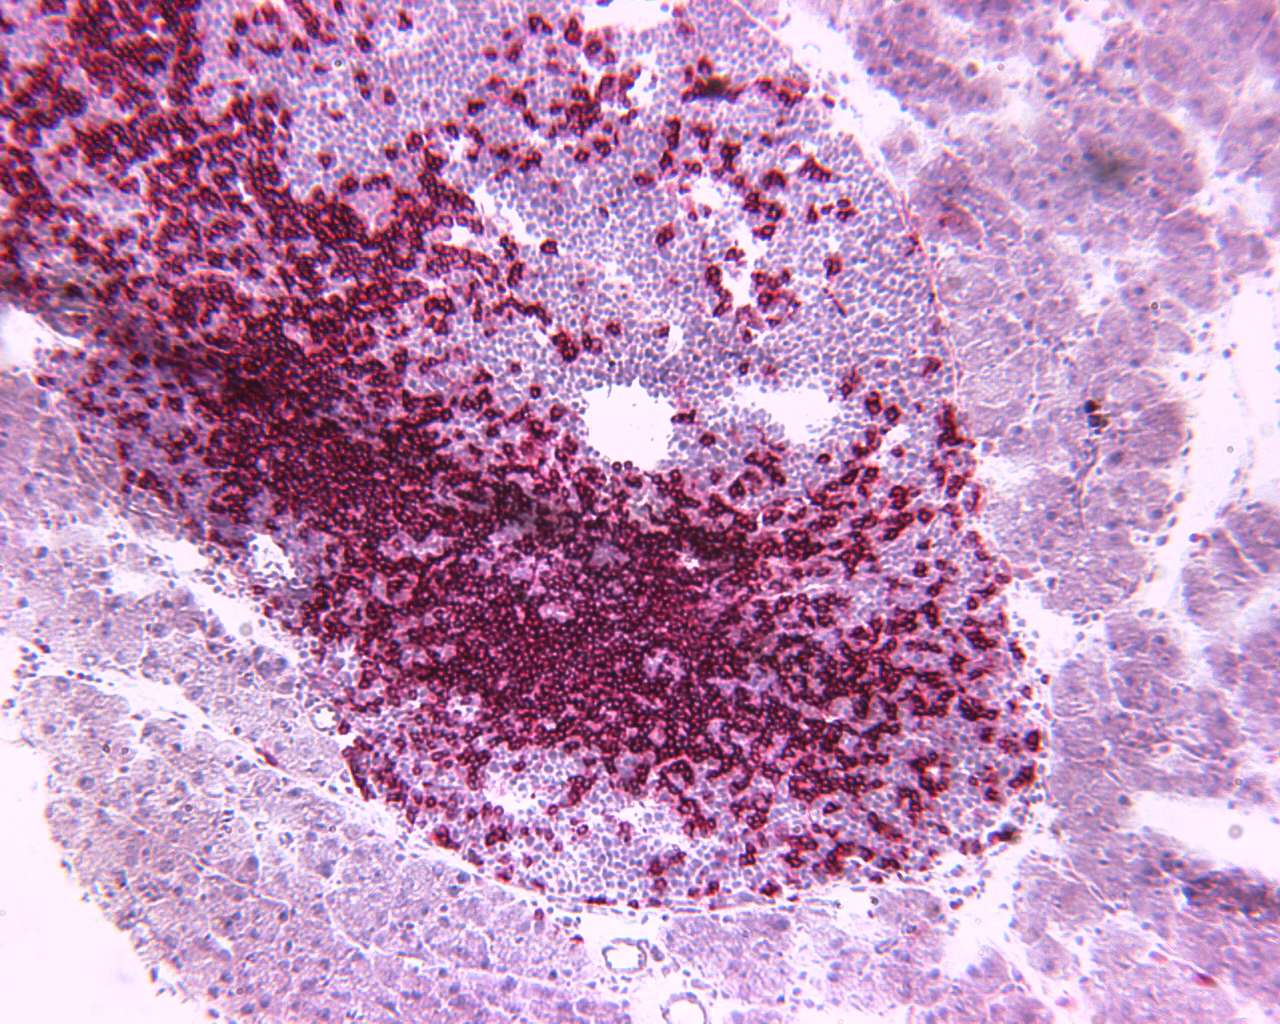 T cells (in red) entering a pancreatic islet